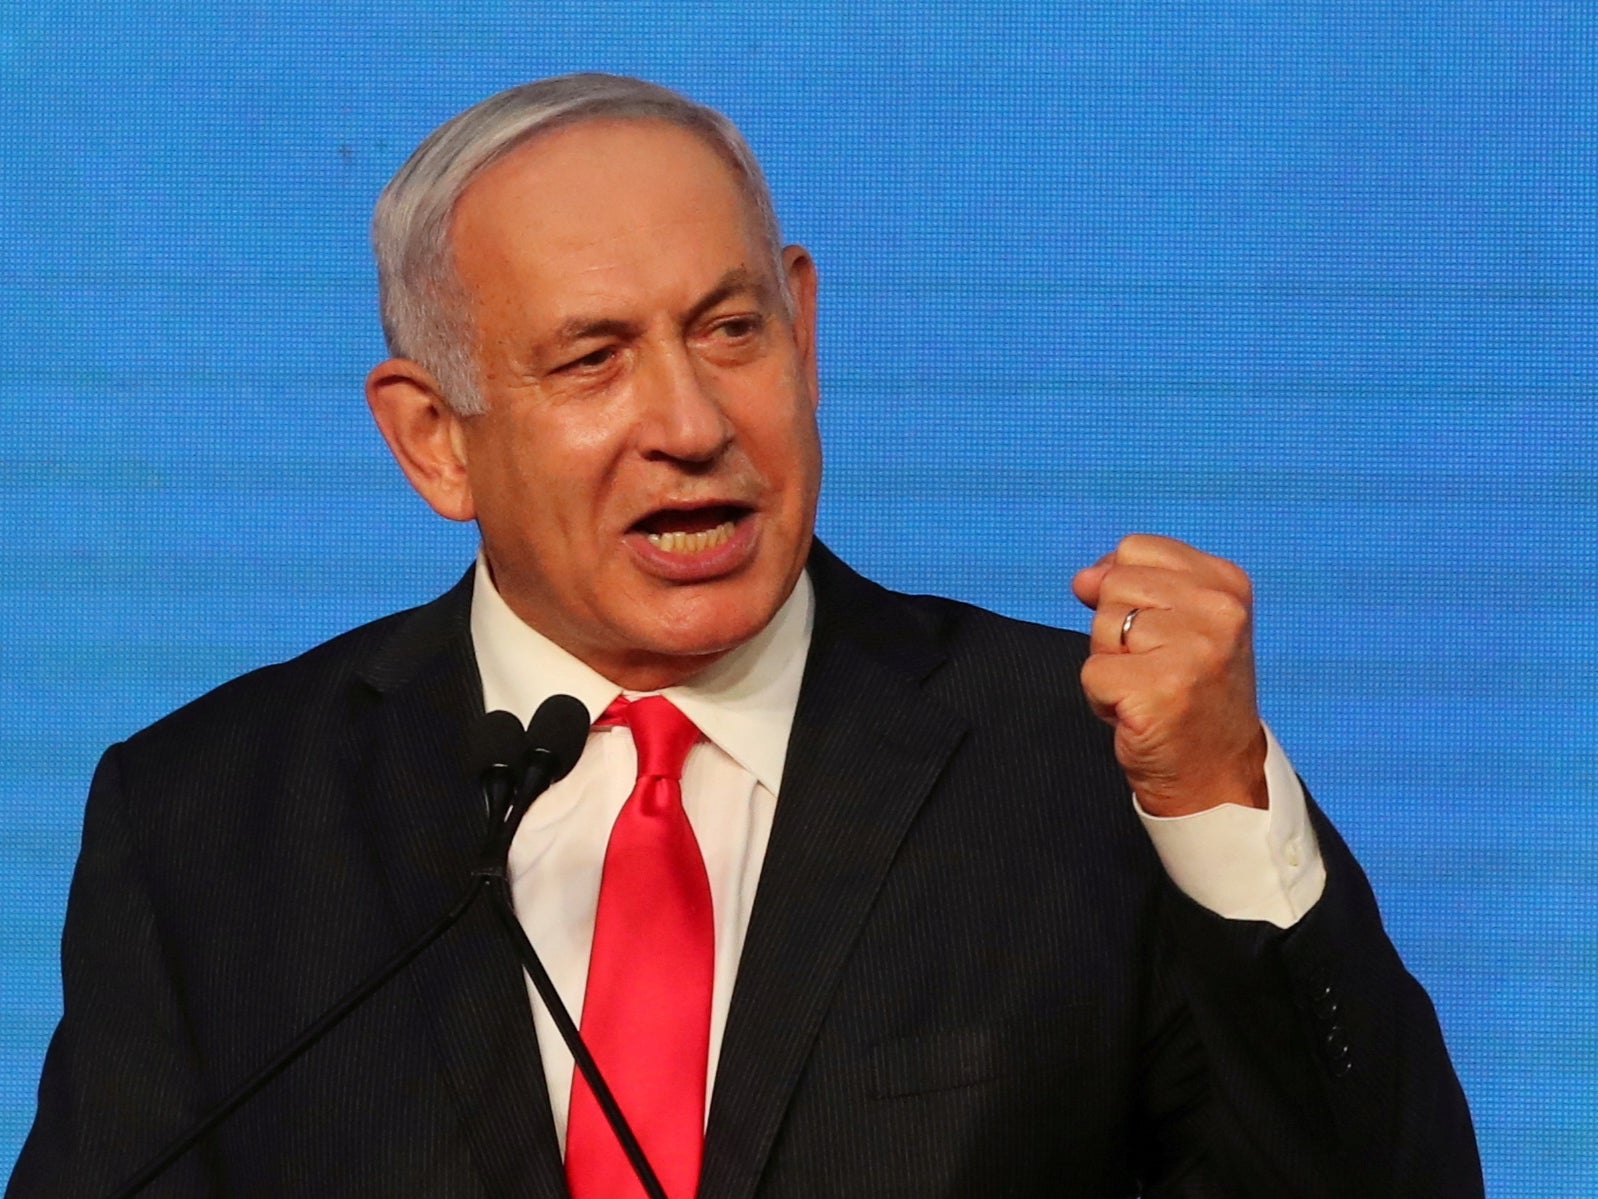 Benjamin Netanyahu has served a record 12 years as Israel’s prime minister